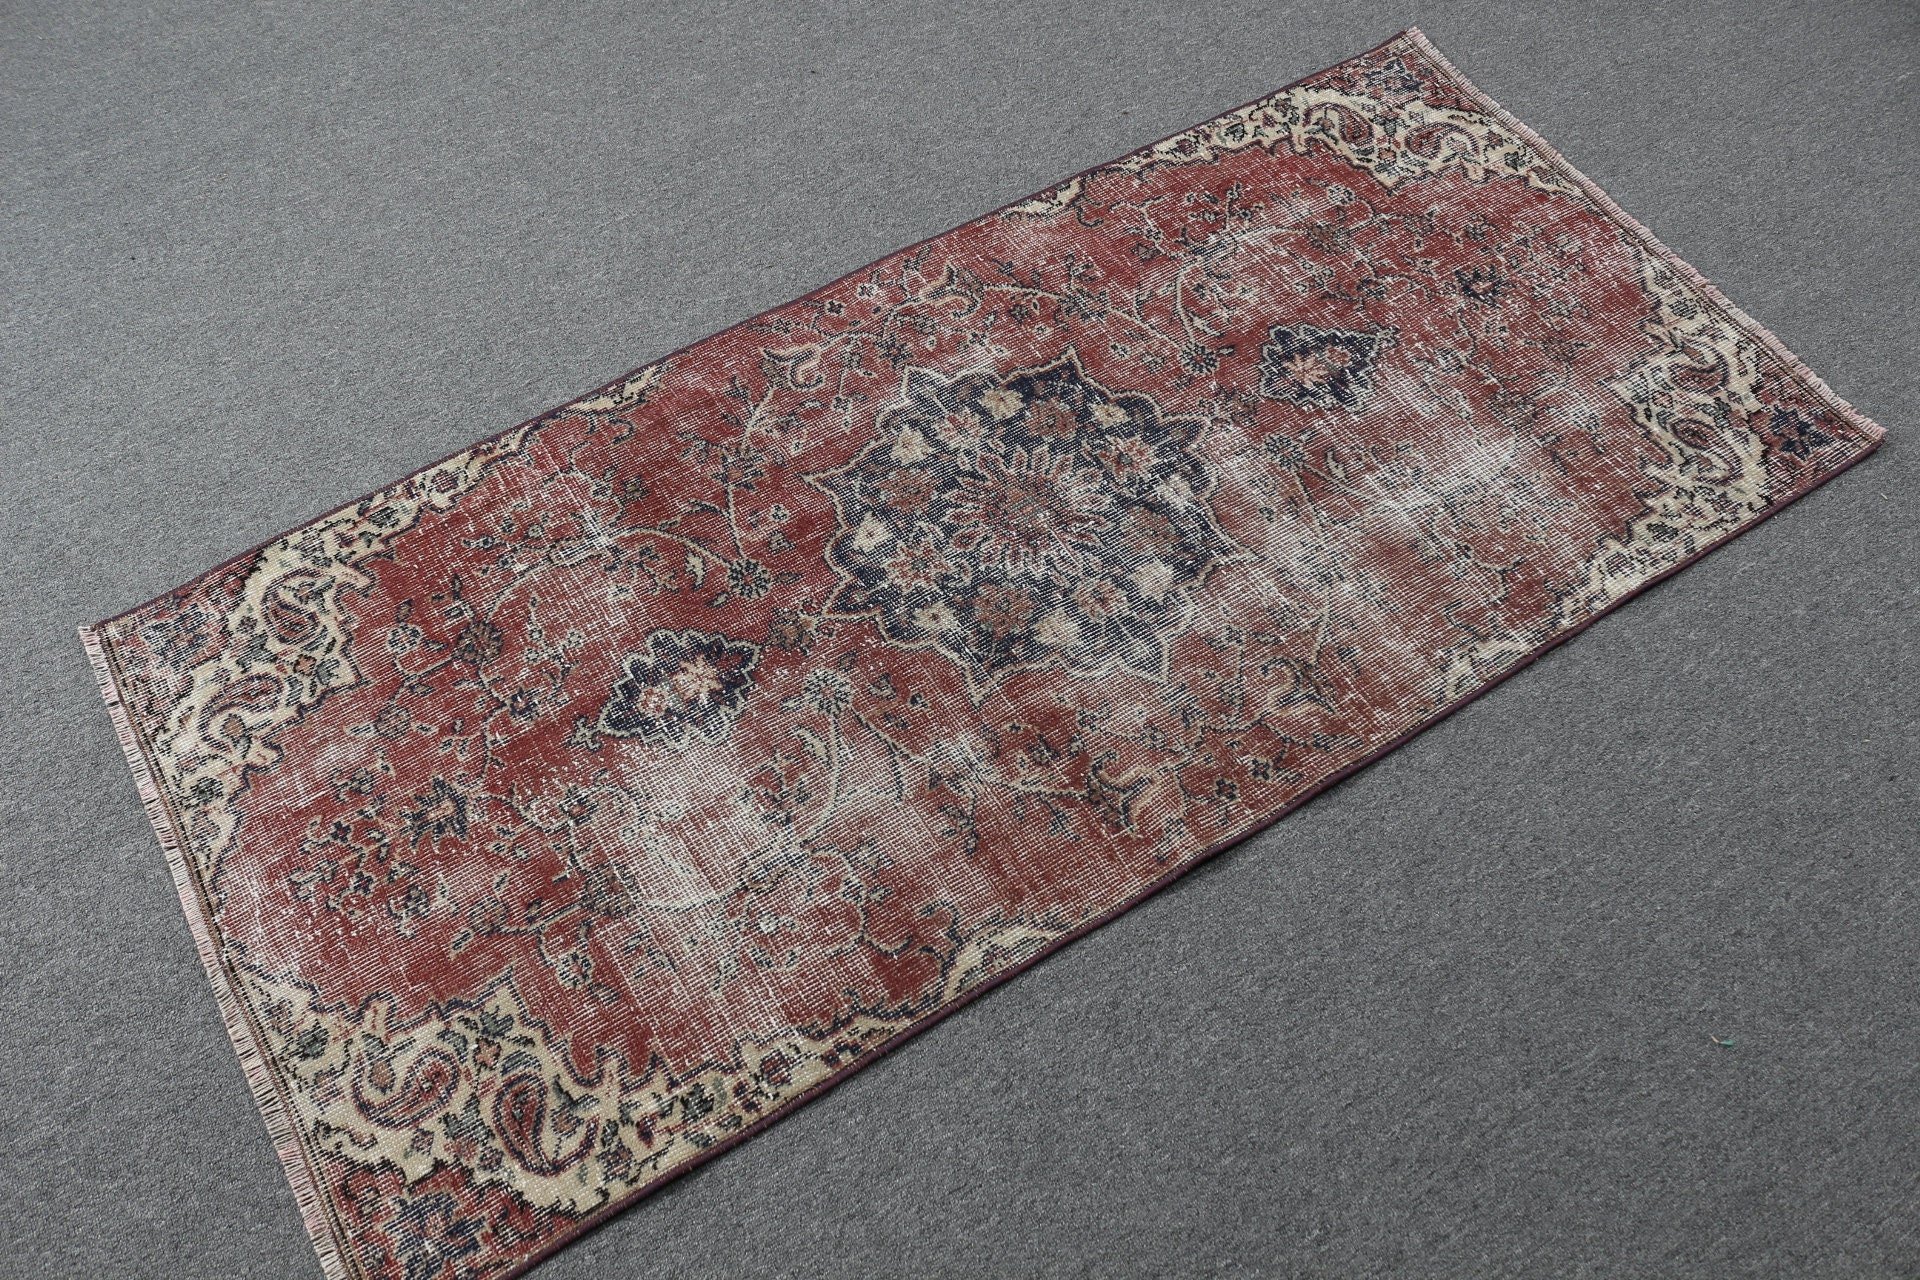 Rugs for Bath, Turkish Rug, Car Mat Rug, 6x2.5 ft Small Rugs, Muted Rug, Cool Rug, Red Cool Rugs, Bedroom Rug, Vintage Rugs